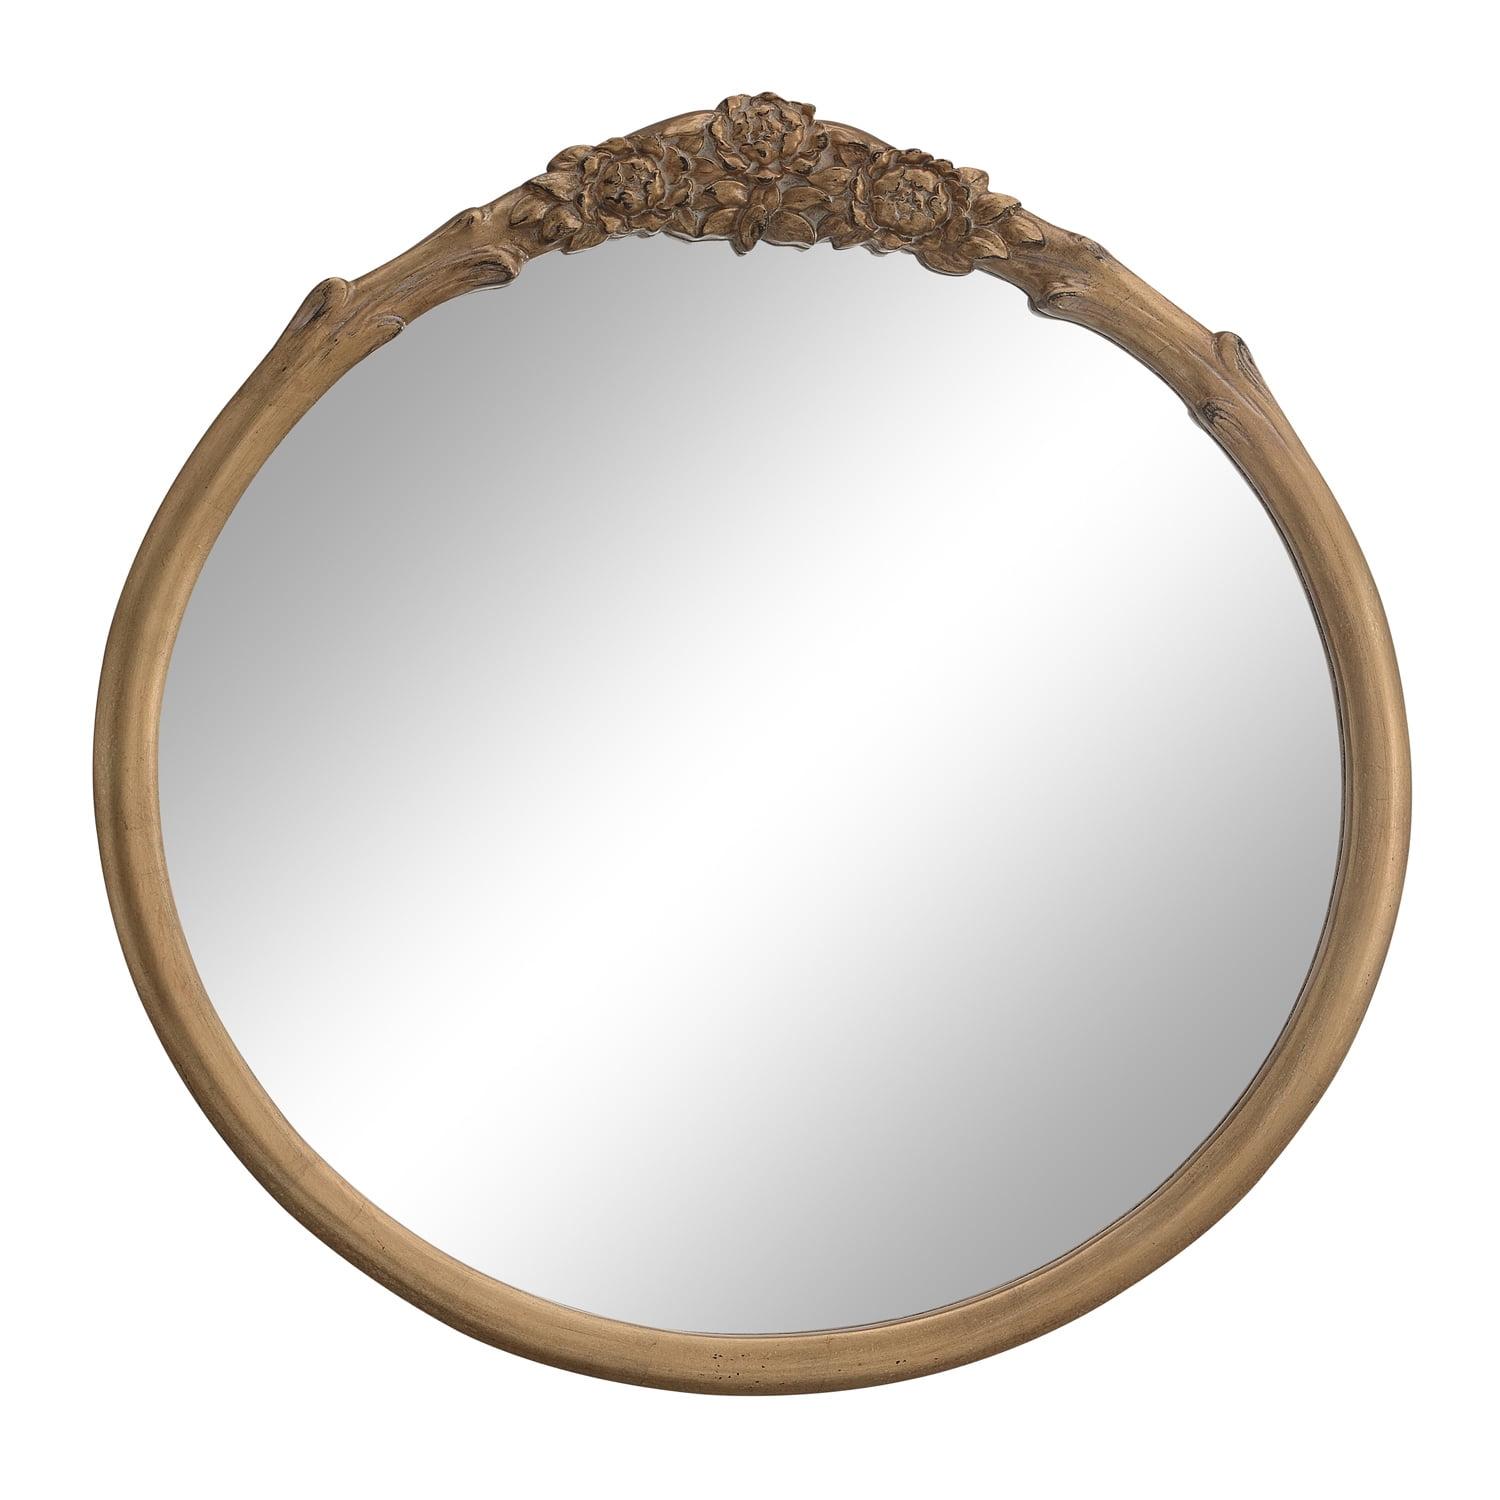 Transitional Round Wood Wall Mirror with Gold Floral Carving, 30"